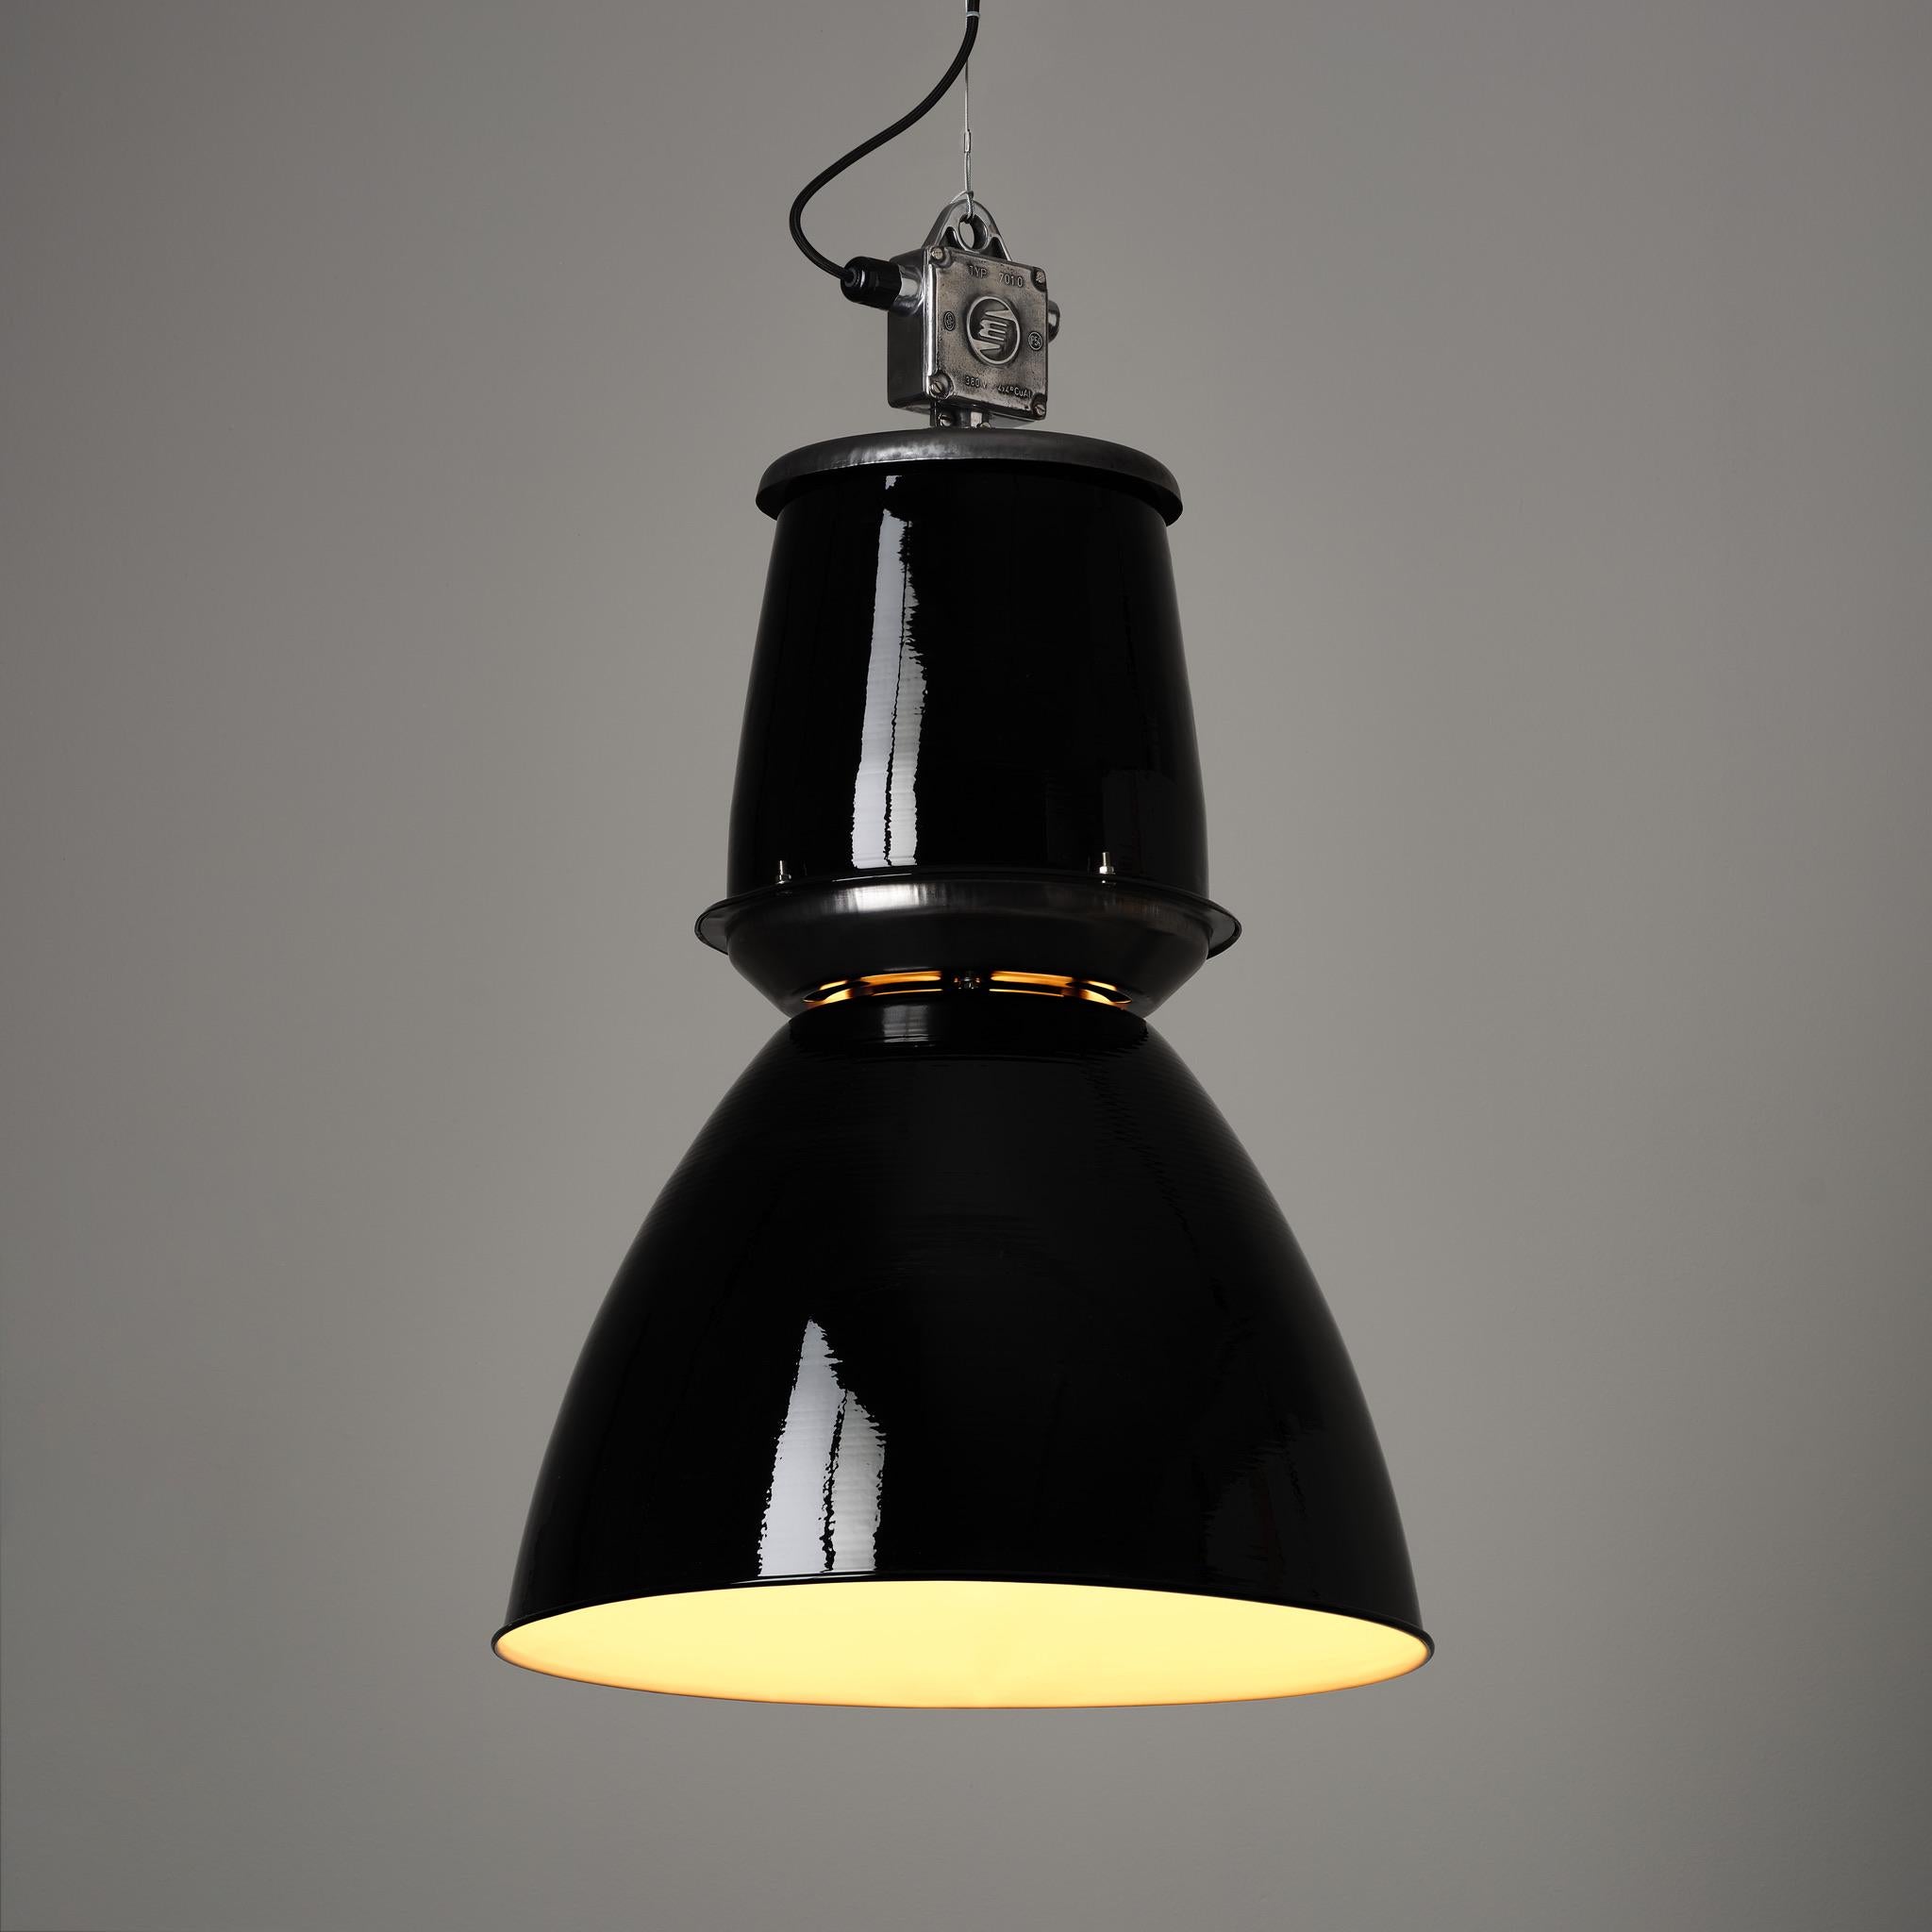 Substantial vintage industrial pendant lights reclaimed from communist-era factories in the Czech Republic. An Eastern Bloc design classic.

Supplied with a repainted shade and polished metalwork.

Finishes: Gloss Black (RAL 9011)/ Gloss Grey